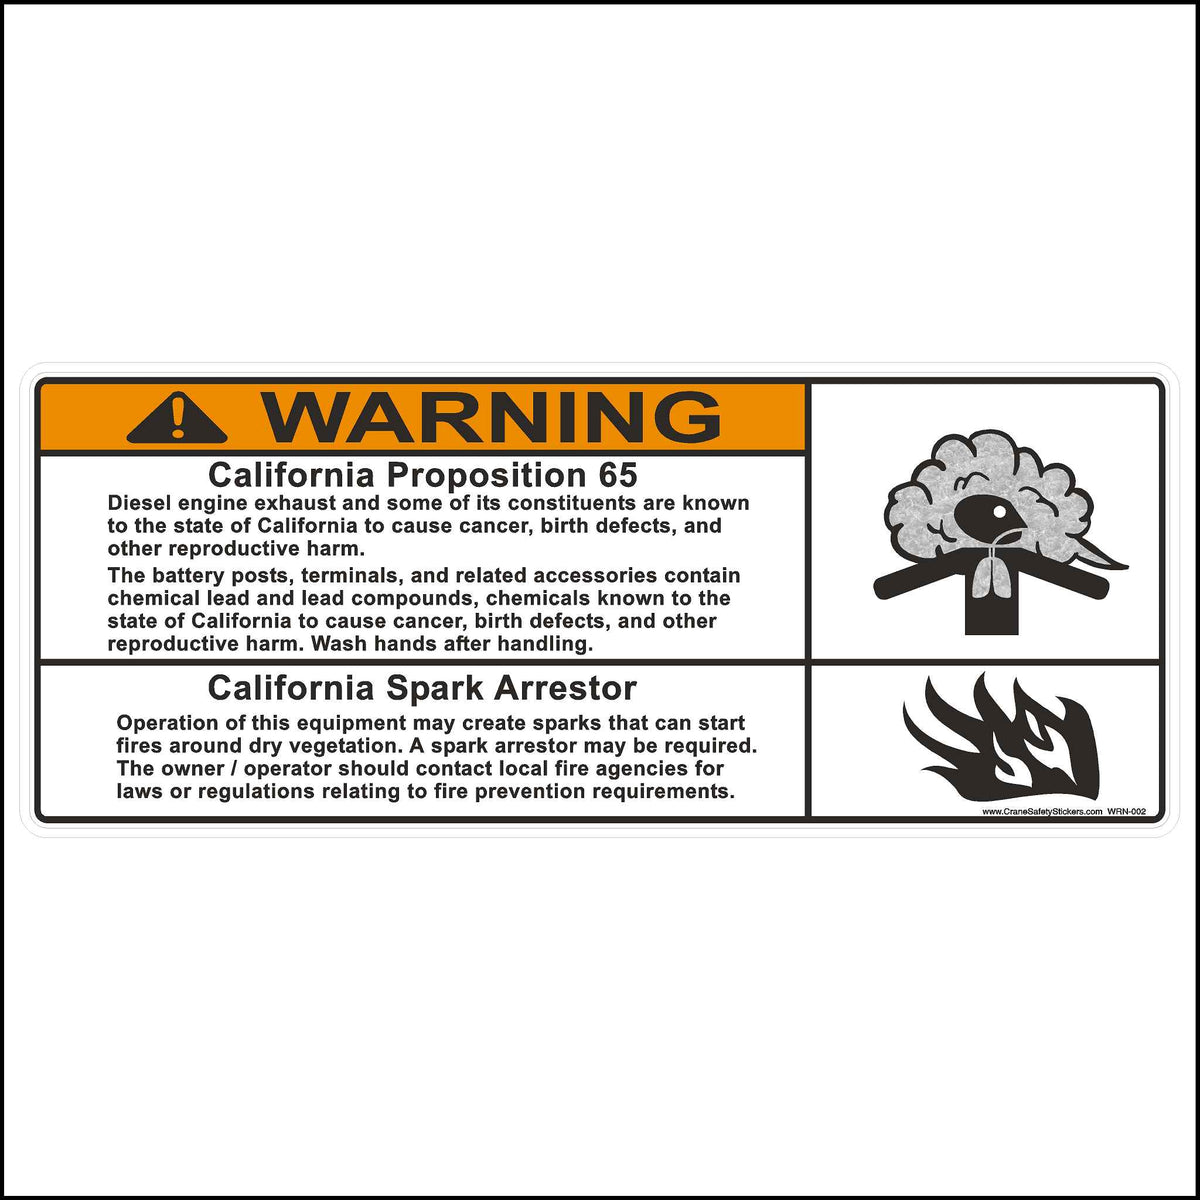 This California Proposition 65 and Spark Arrestor Sticker is Printed With. WARNING California Proposition 65 Diesel engine exhaust and some of its constituents are known to the state of California to cause cancer, birth defects, and other reproductive harm. The battery posts, terminals, and related accessories contain chemical lead and lead compounds, chemicals known to the state of California to cause cancer, birth defects, and other reproductive harm. Wash hands after handling.